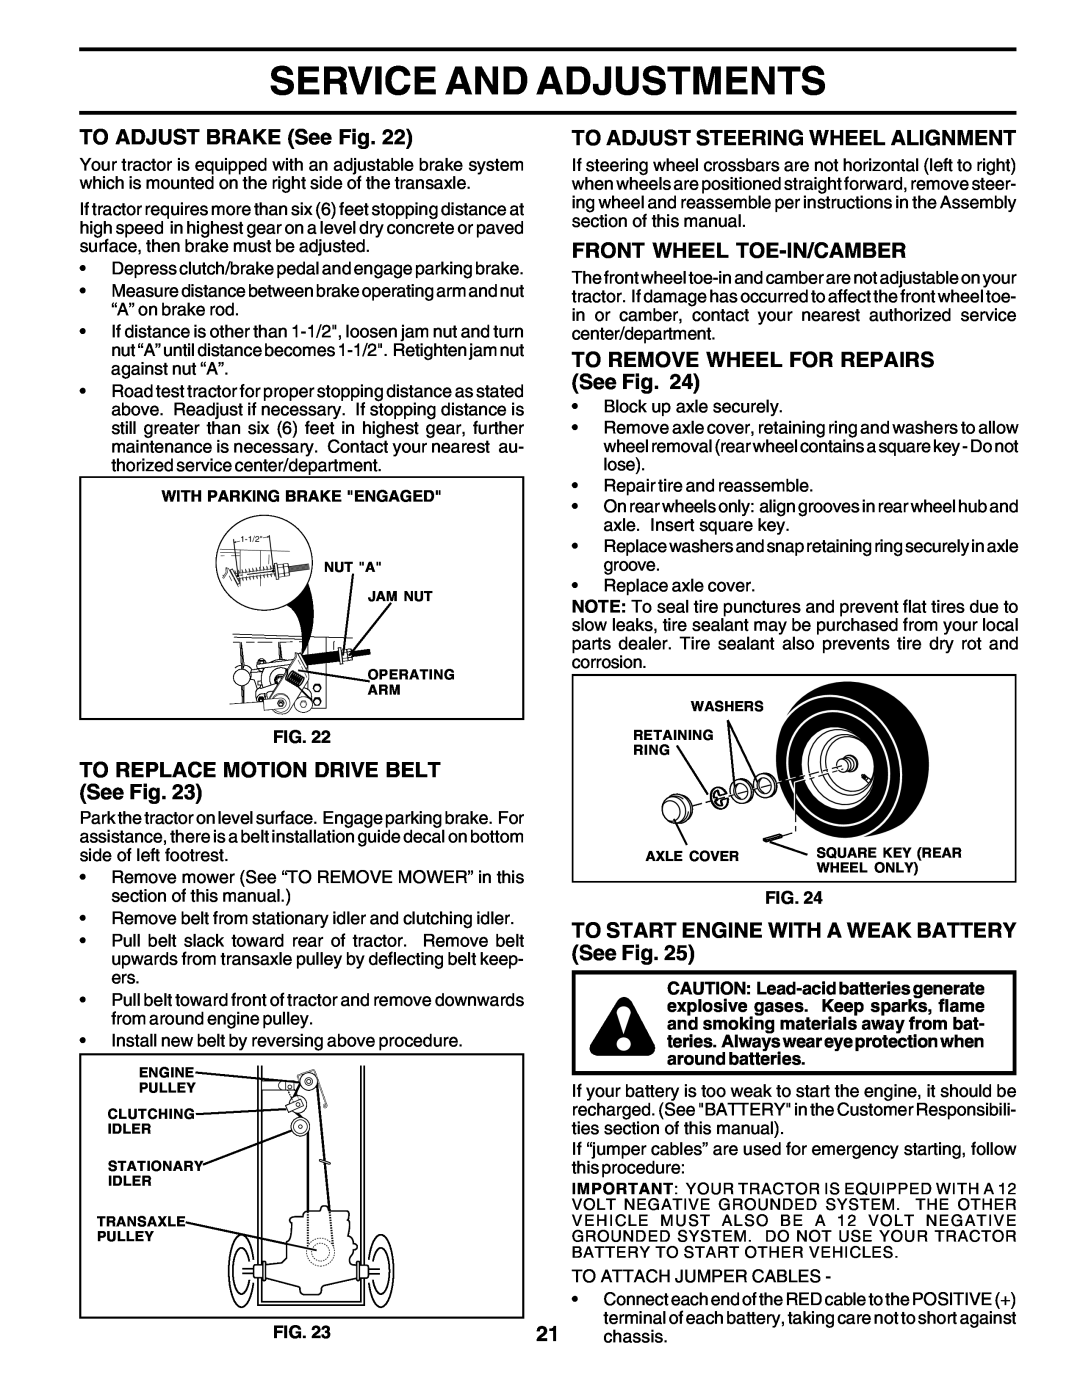 Poulan PO14542C manual Service And Adjustments, TO ADJUST BRAKE See Fig, TO REPLACE MOTION DRIVE BELT See Fig 